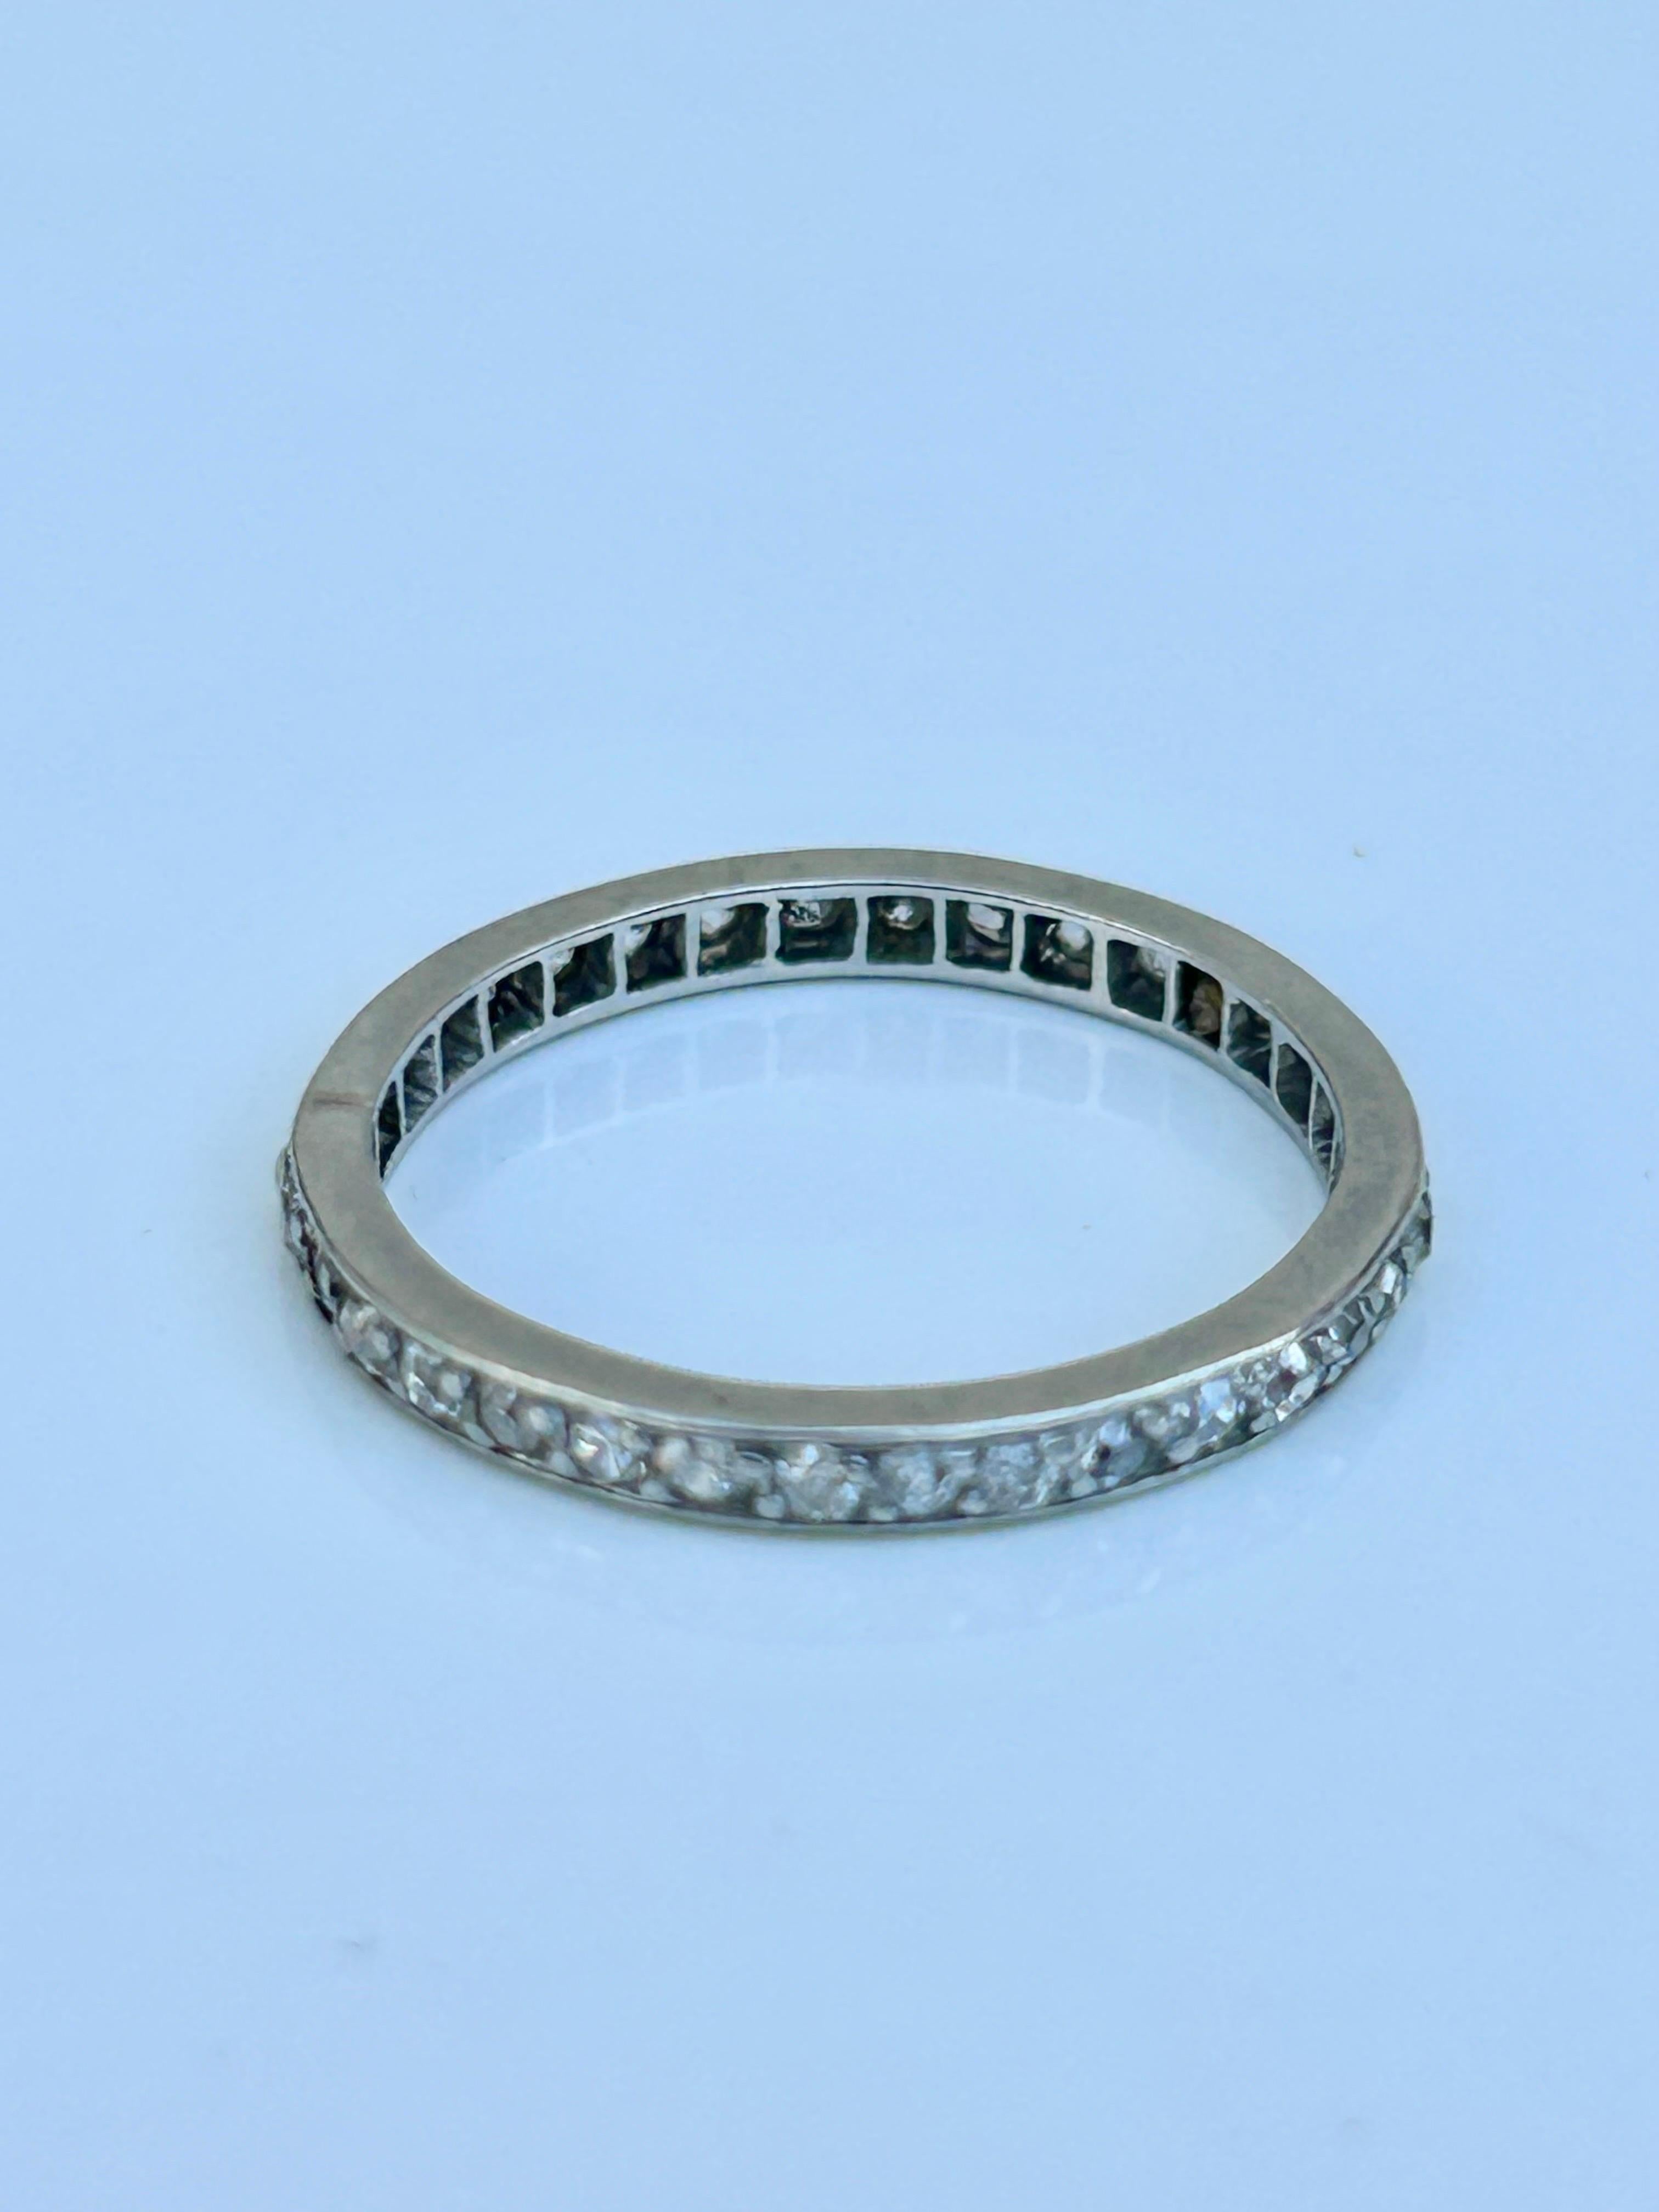 Art Deco Era Platinum Diamond Full Eternity Band Ring 

Classic and timeless diamond eternity 

The item comes without the box in the photo but will be presented in a Howard’s Antique gift book

Measurements: weight 2.25g, size UK L US 6, band width